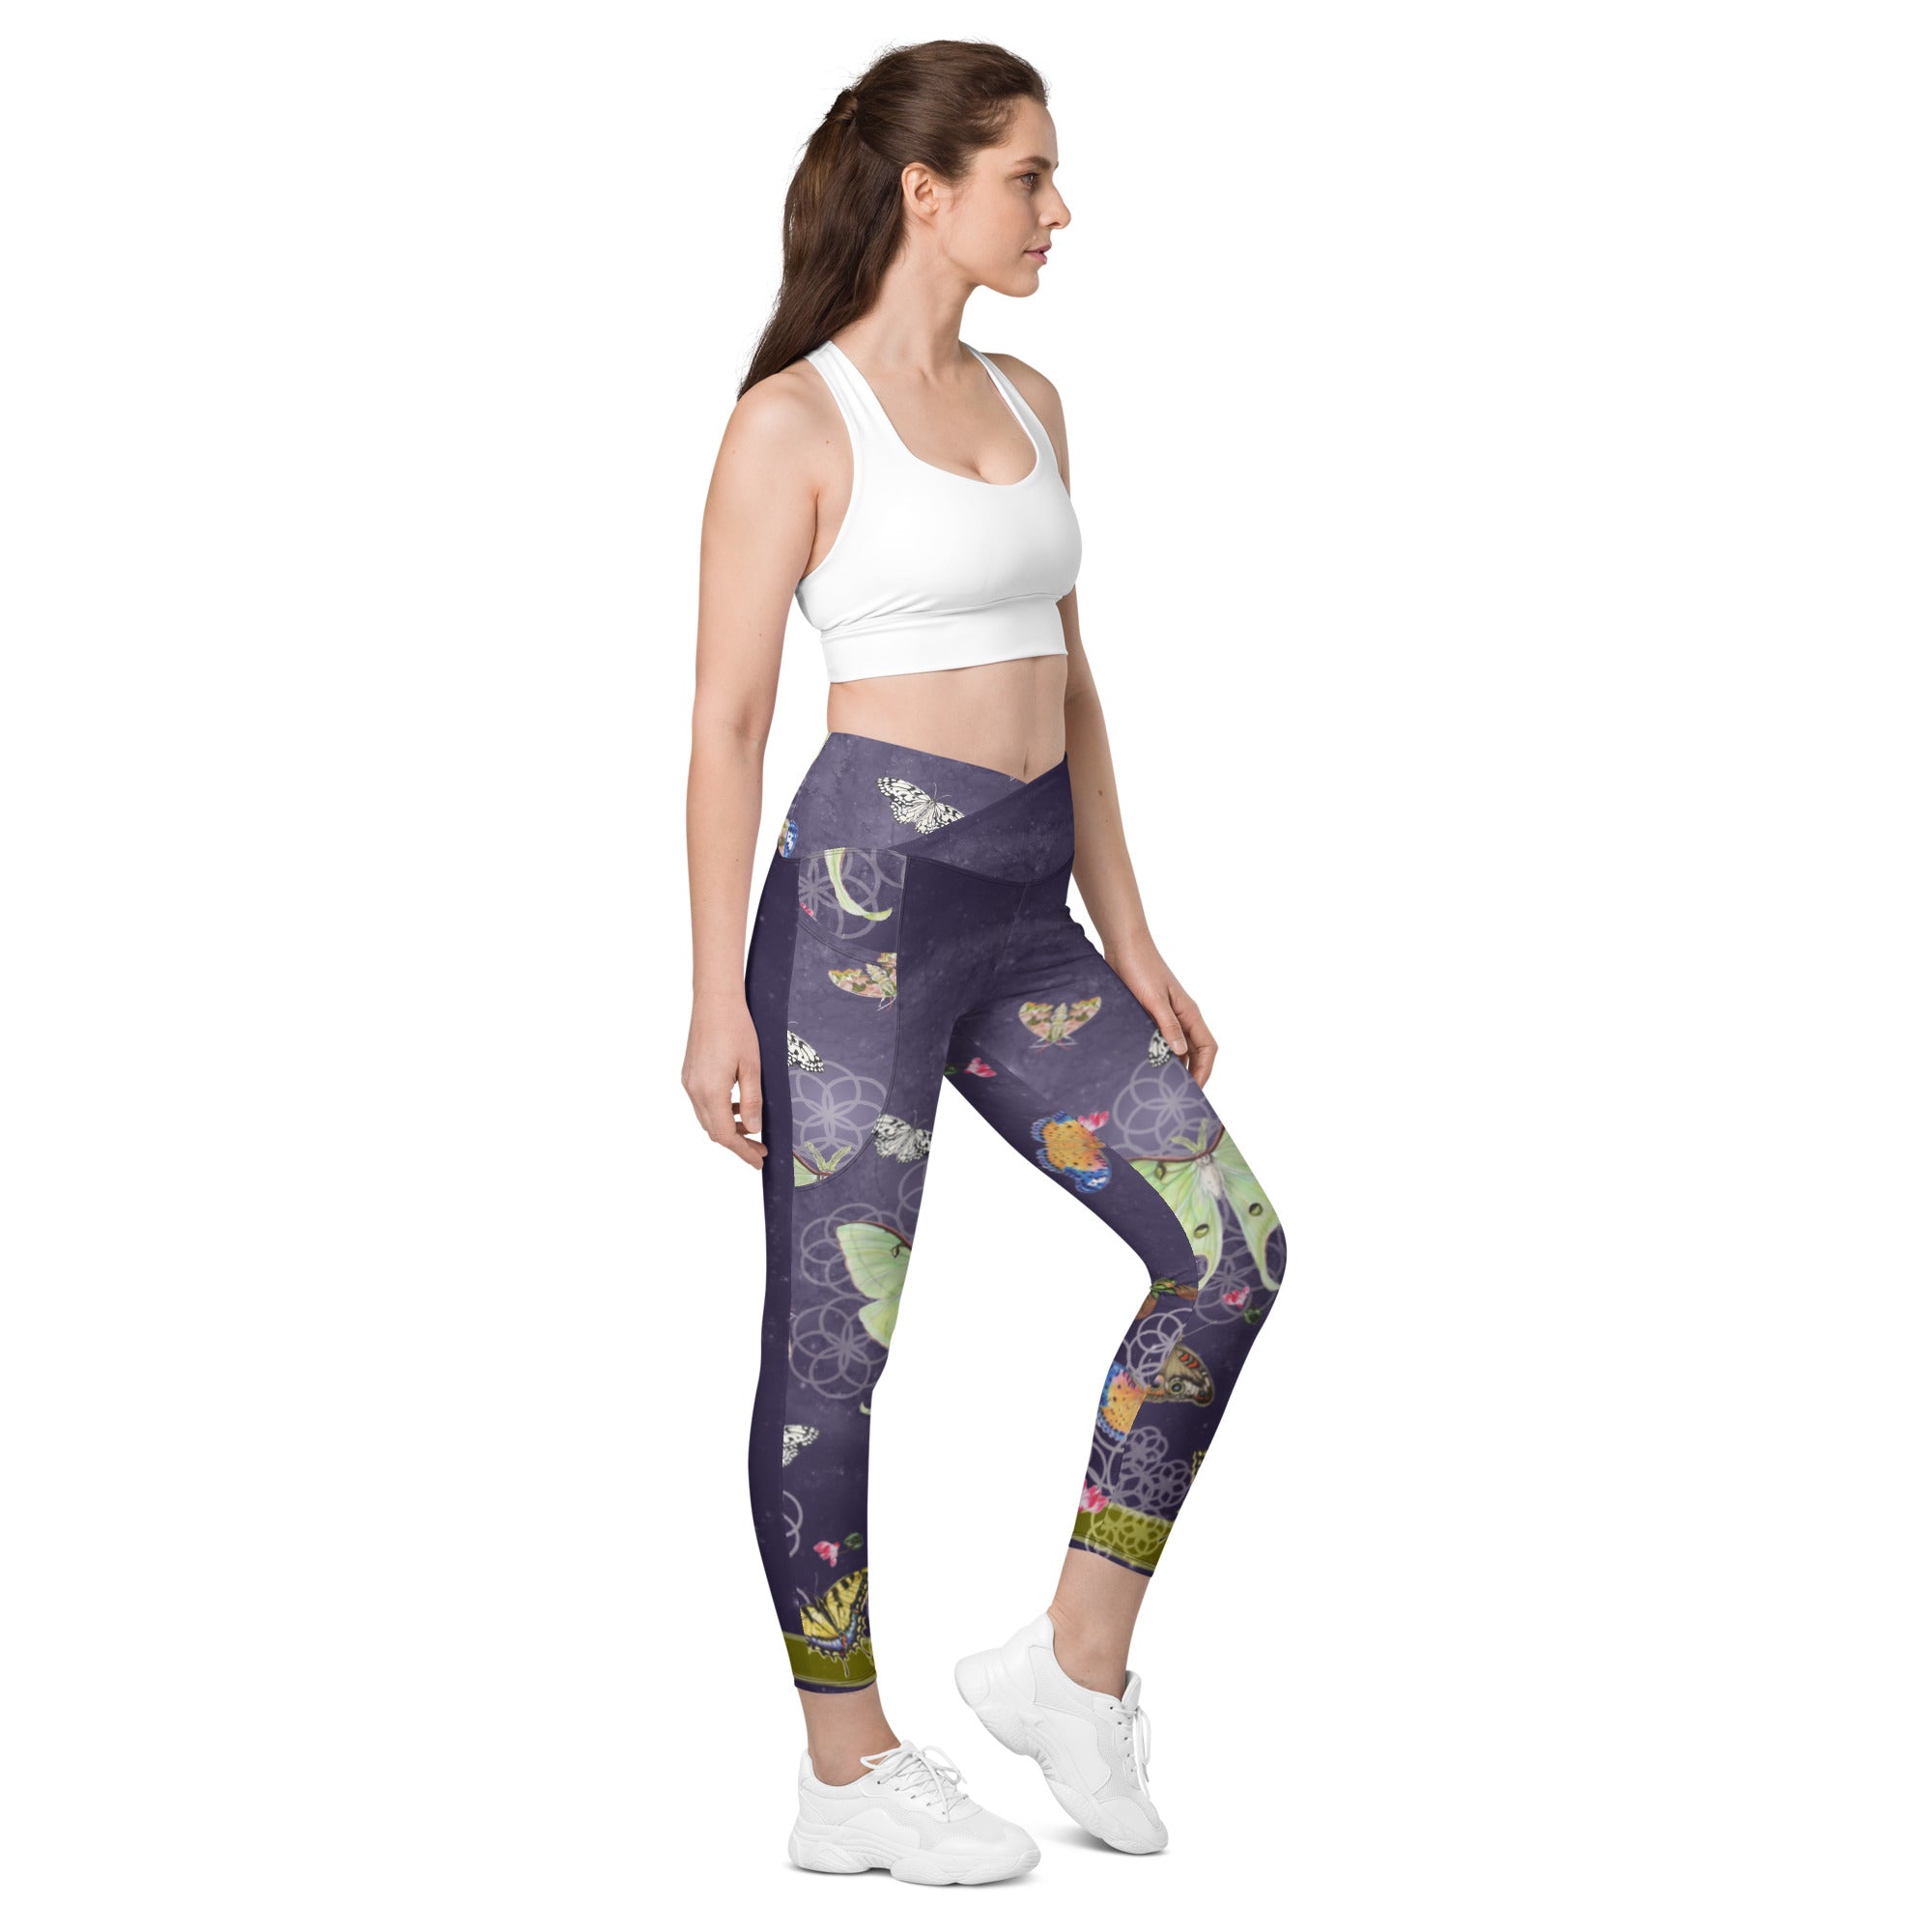 The Invasion Situation - Crossover leggings with pockets